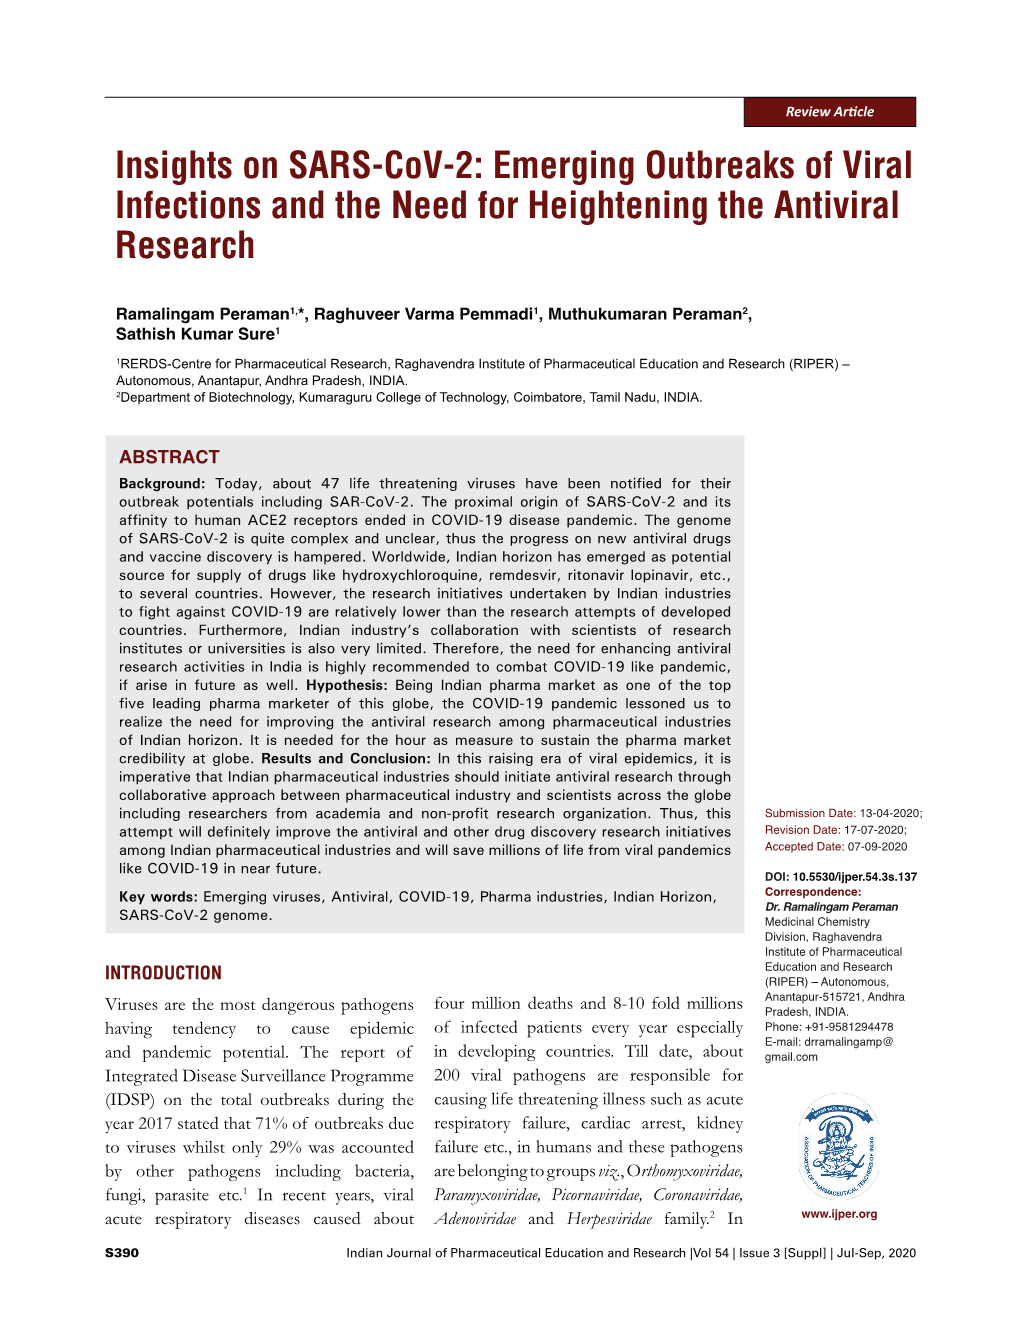 Insights on SARS-Cov-2: Emerging Outbreaks of Viral Infections and the Need for Heightening the Antiviral Research